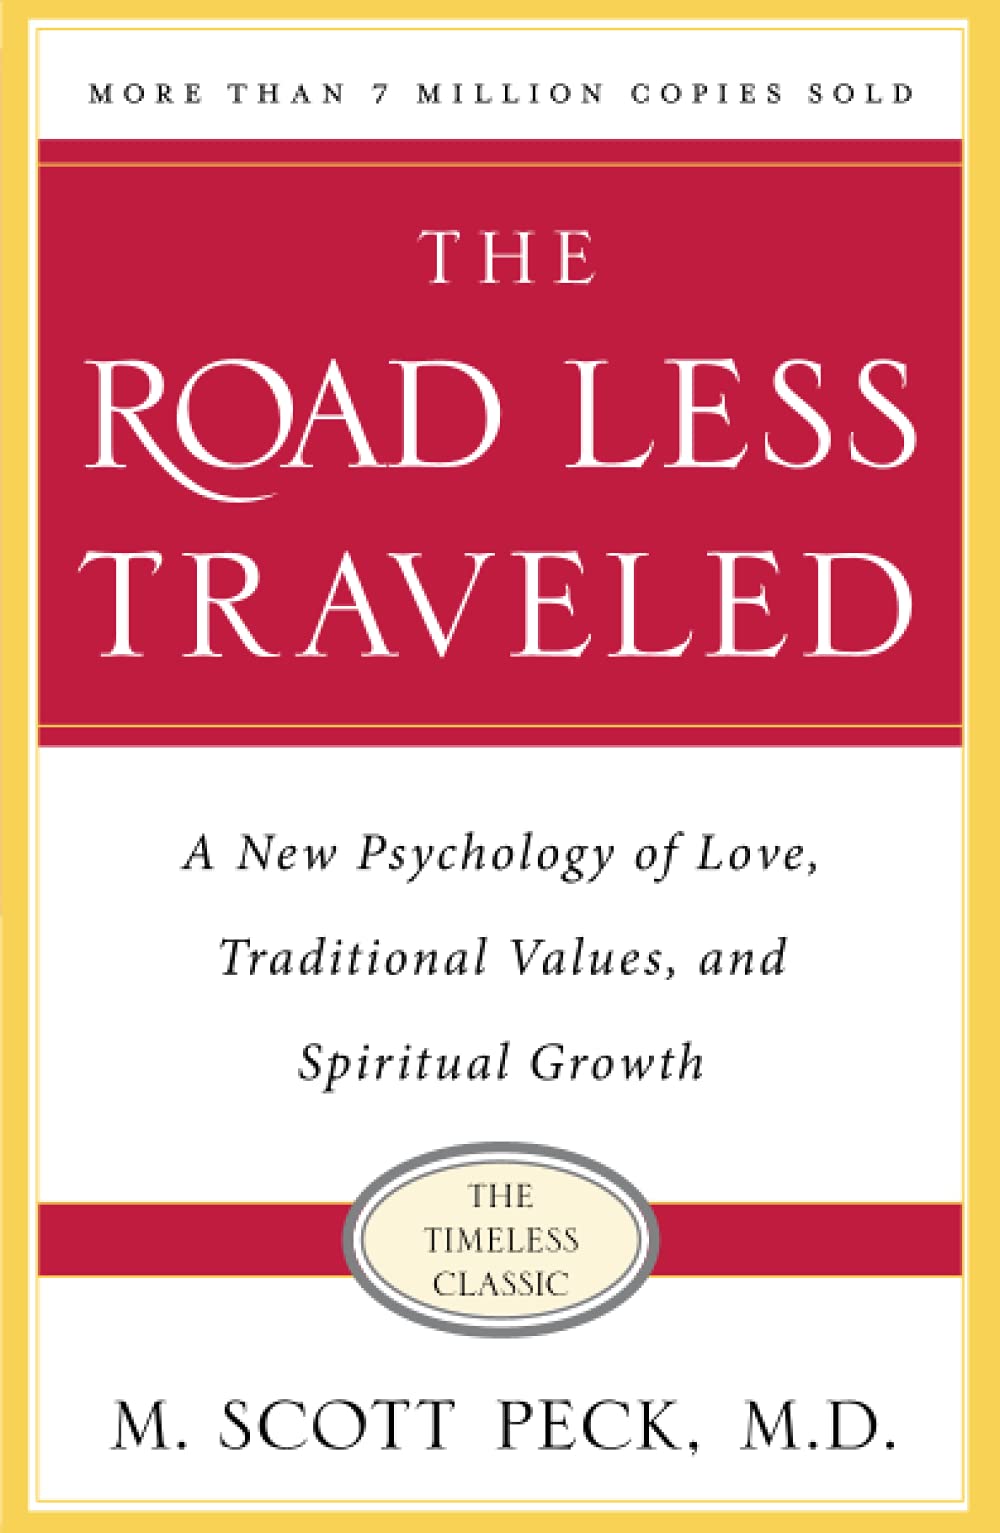 The Road Less Traveled, Timeless Edition: A New Psychology of Love, Traditional Values and Spiritual Growth Paperback – February 4, 2003